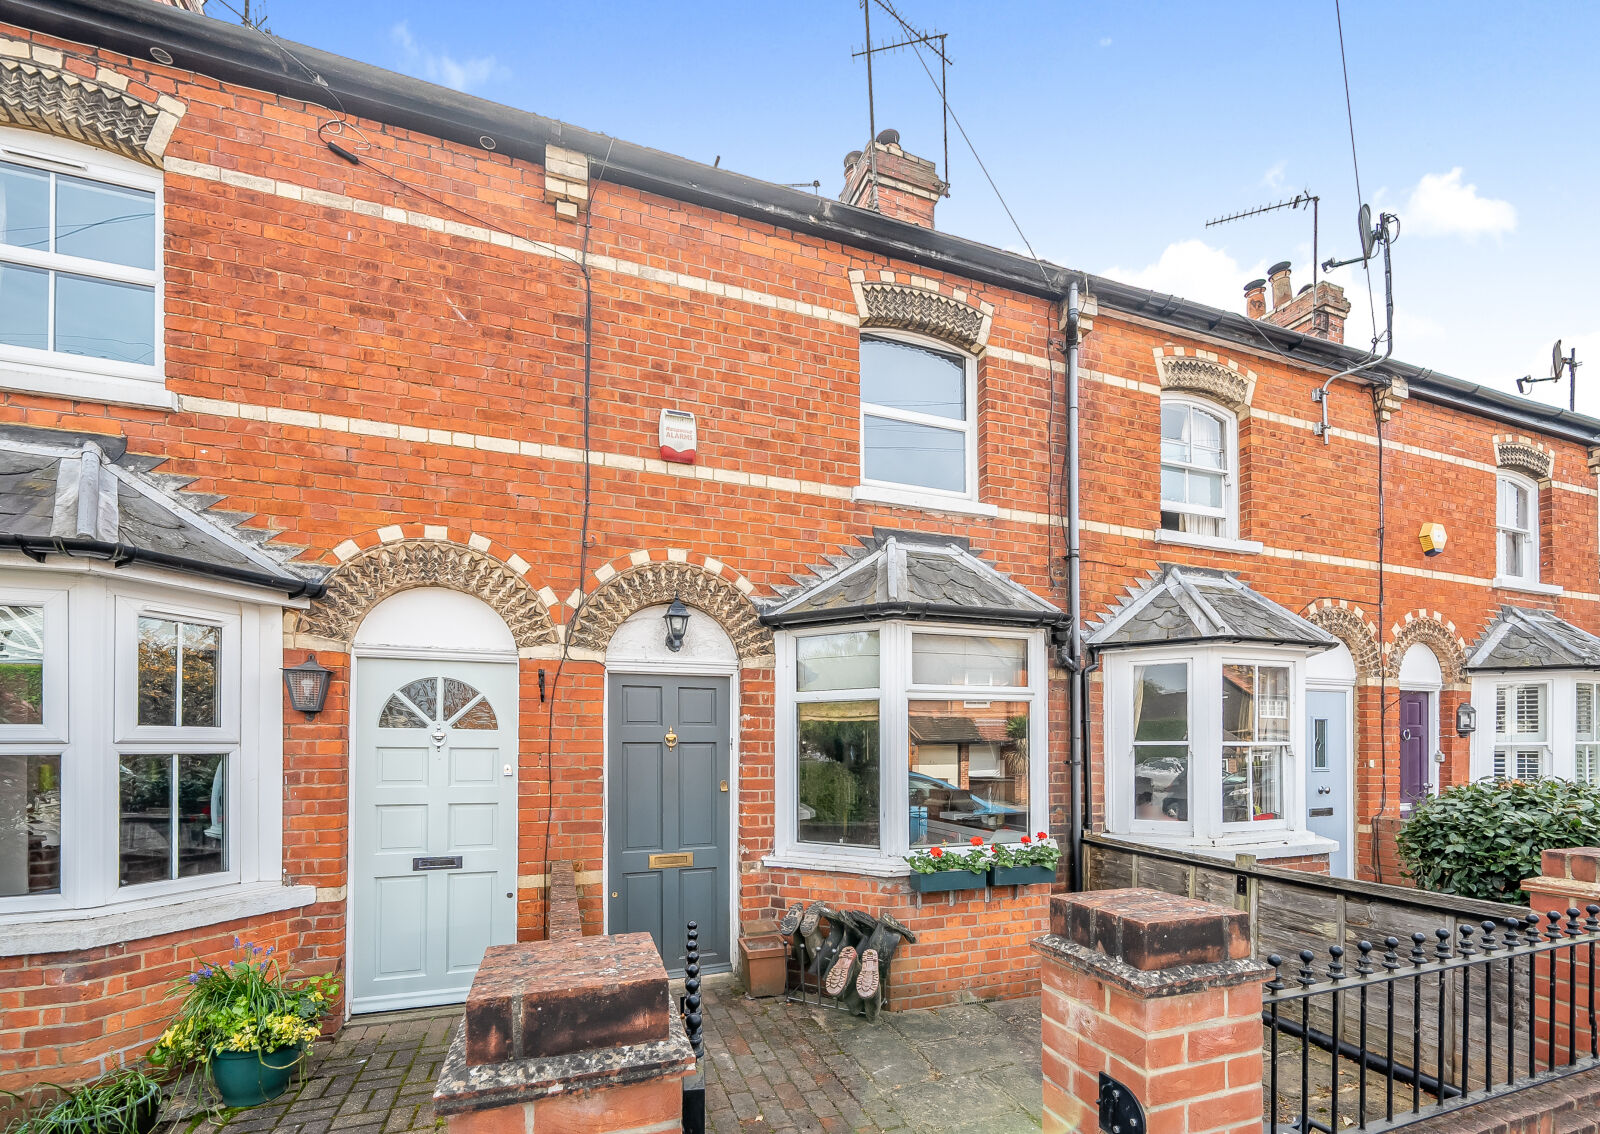 3 bedroom mid terraced house for sale Victoria Road, Wargrave, RG10, main image